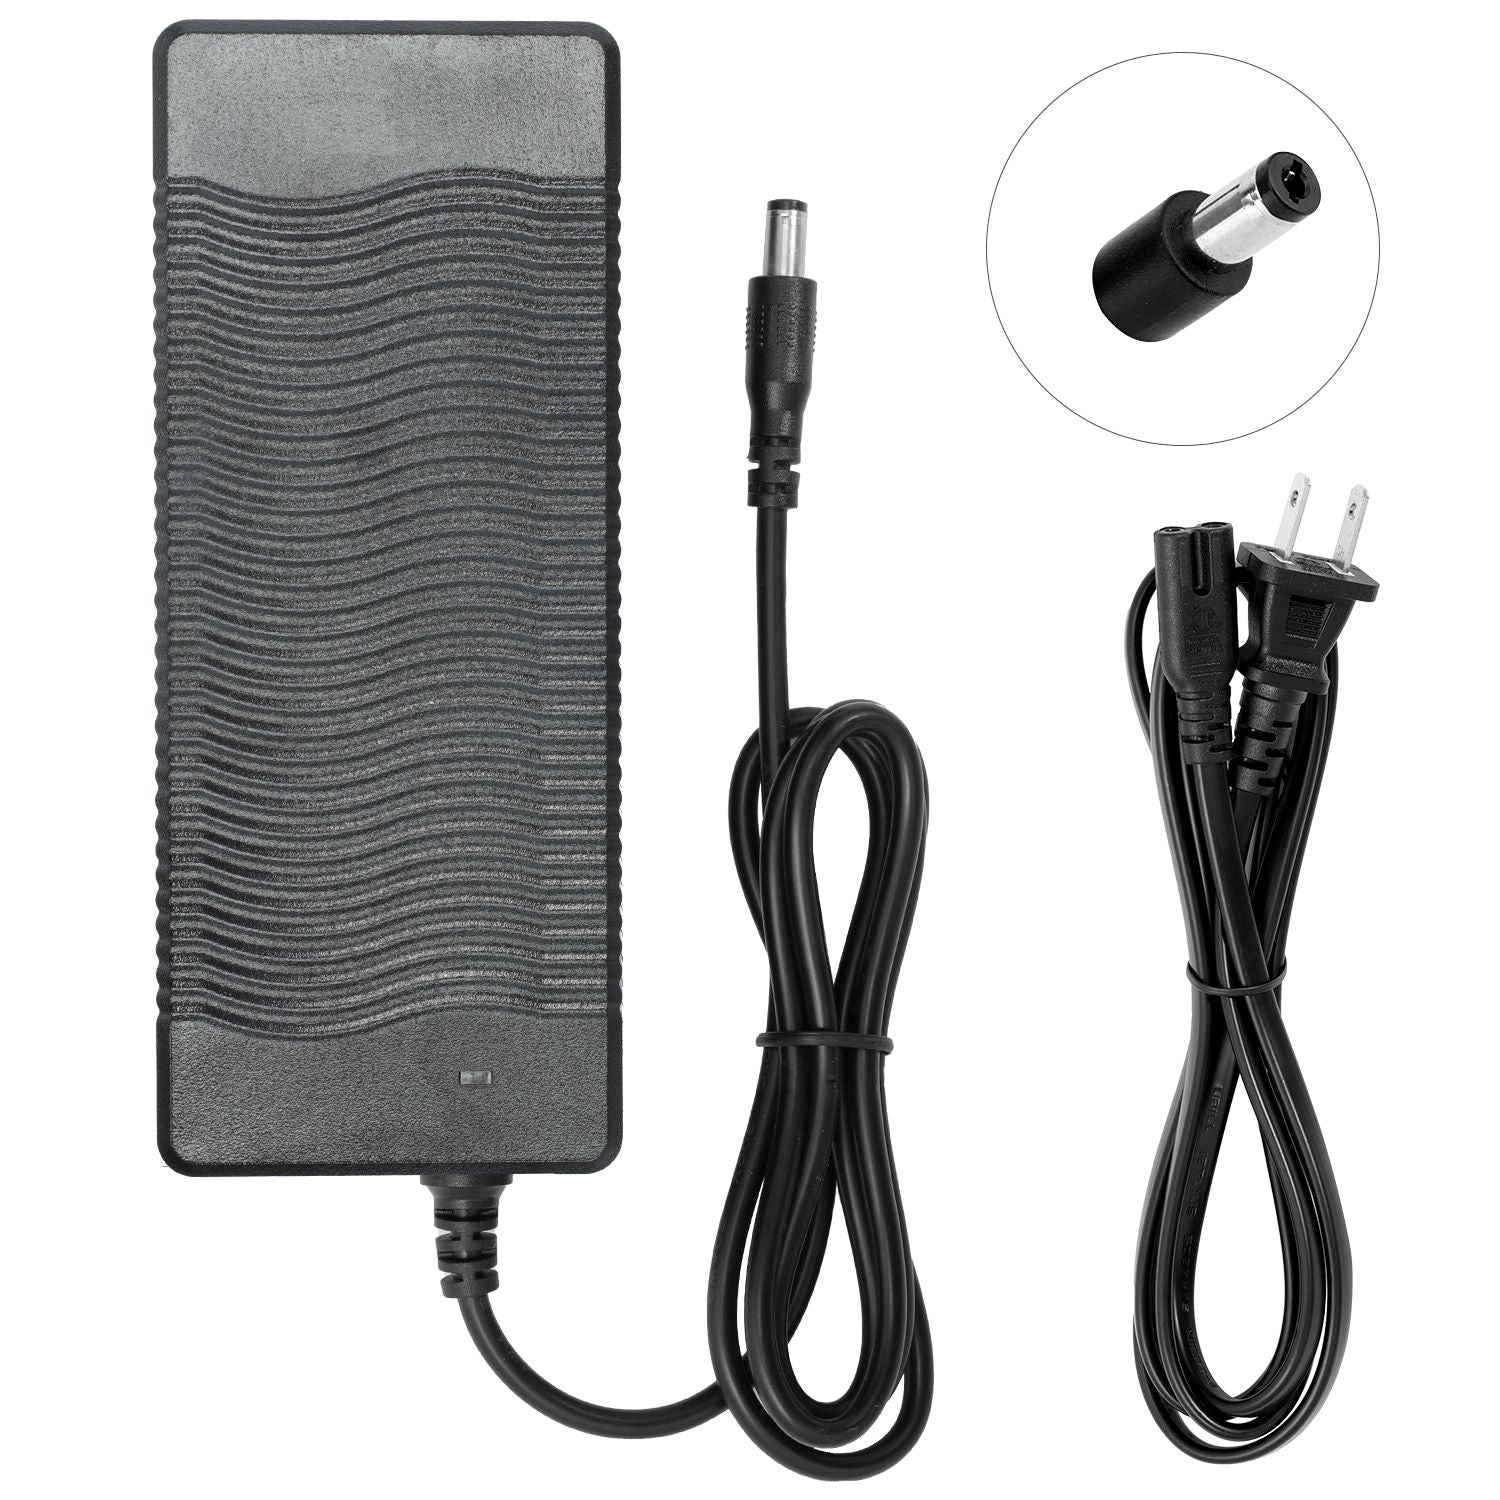 Charger for Go Power Go Express Electric Bike